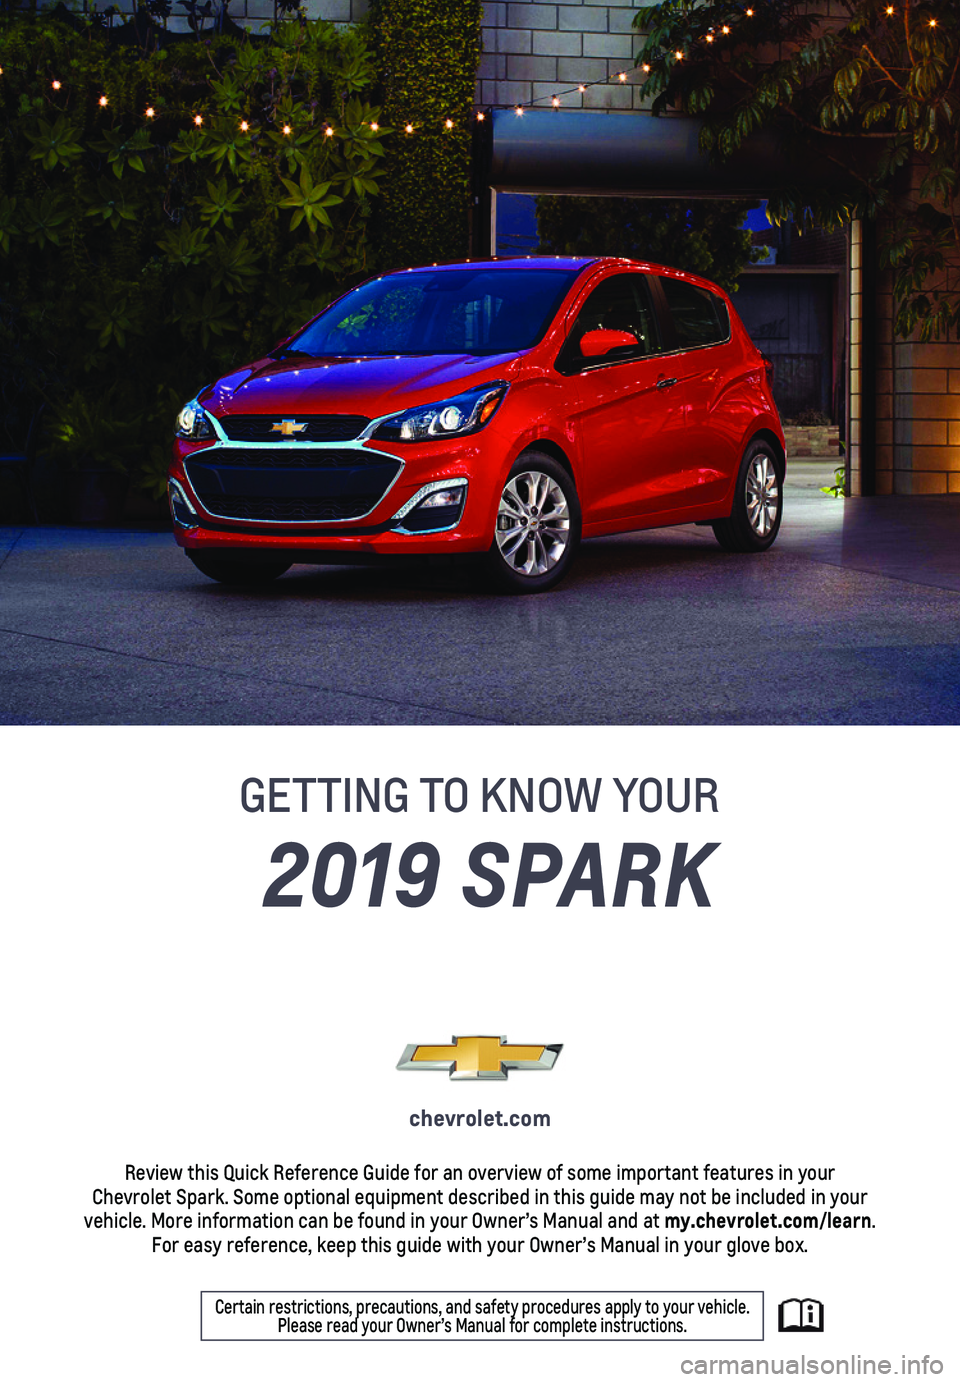 CHEVROLET SPARK 2019  Get To Know Guide 1
2019 SPARK
GETTING TO KNOW YOUR
chevrolet.com
Review this Quick Reference Guide for an overview of some important feat\
ures in your  Chevrolet Spark. Some optional equipment described in this guide